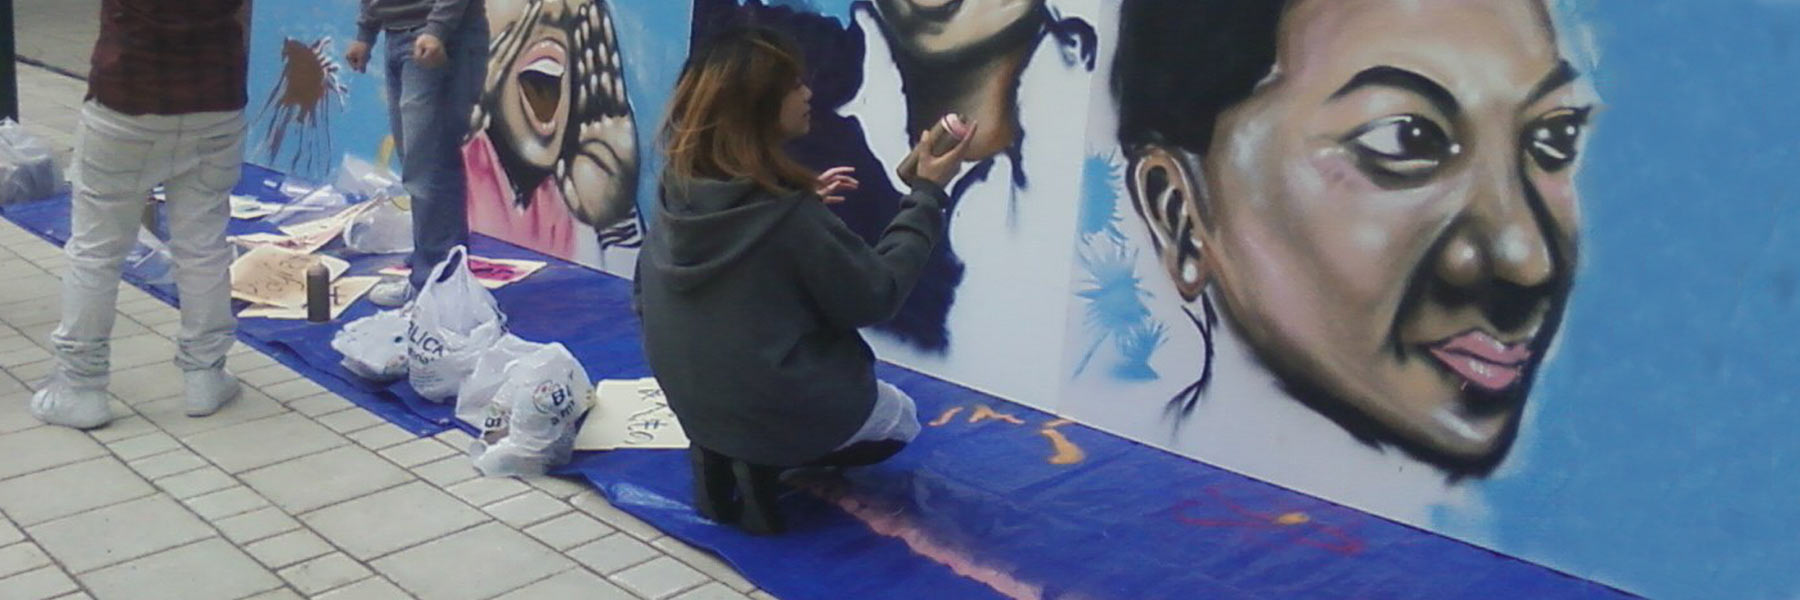 young asian people painting mural